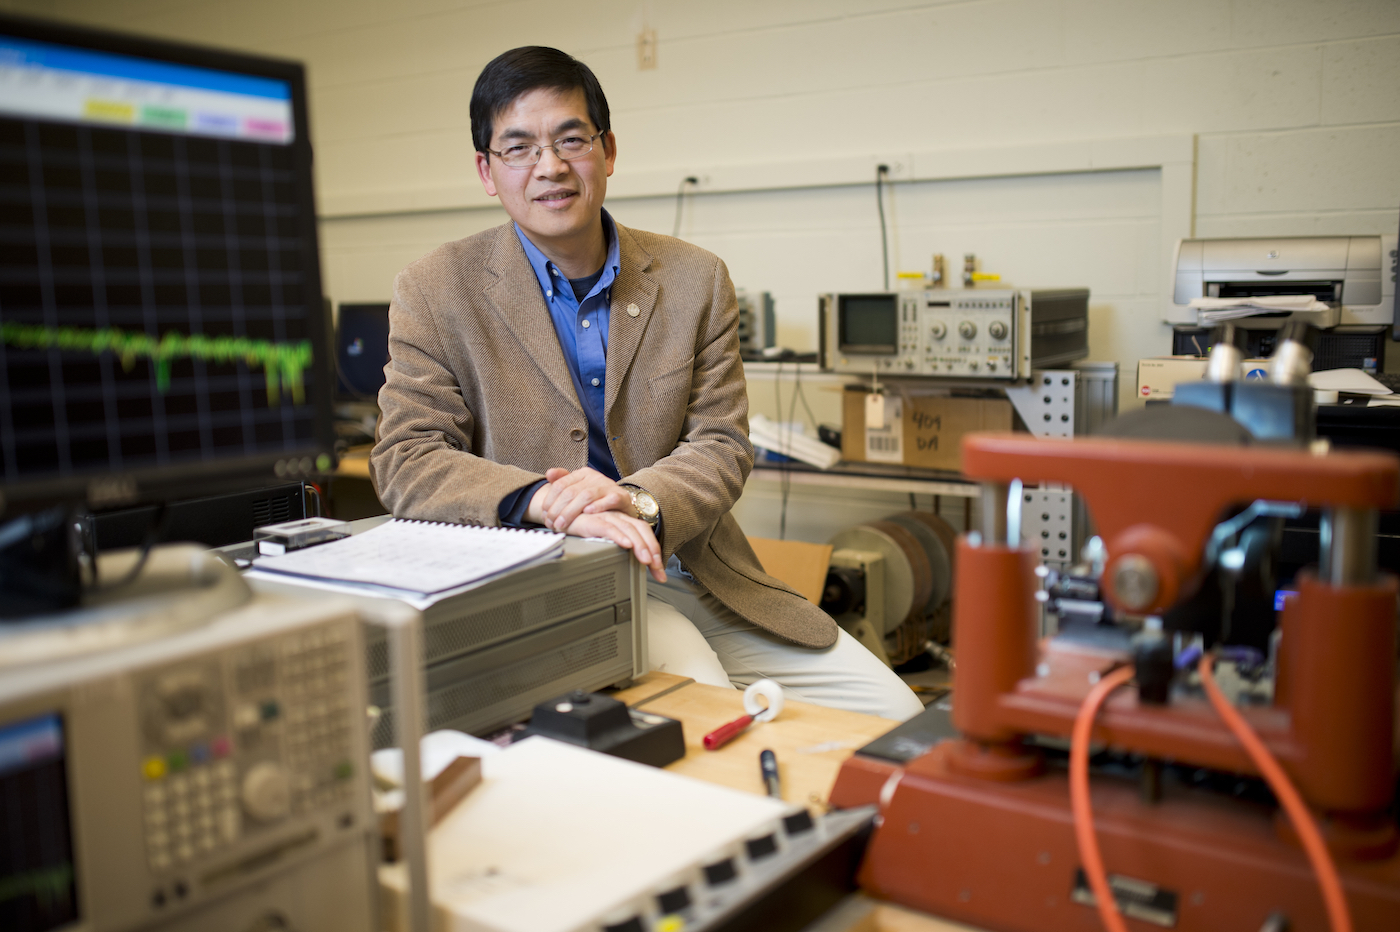 Nian Sun, professor of electrical and computer engineering, developed a new approach for designing antennas that allows them to be made up to a thousand times smaller.